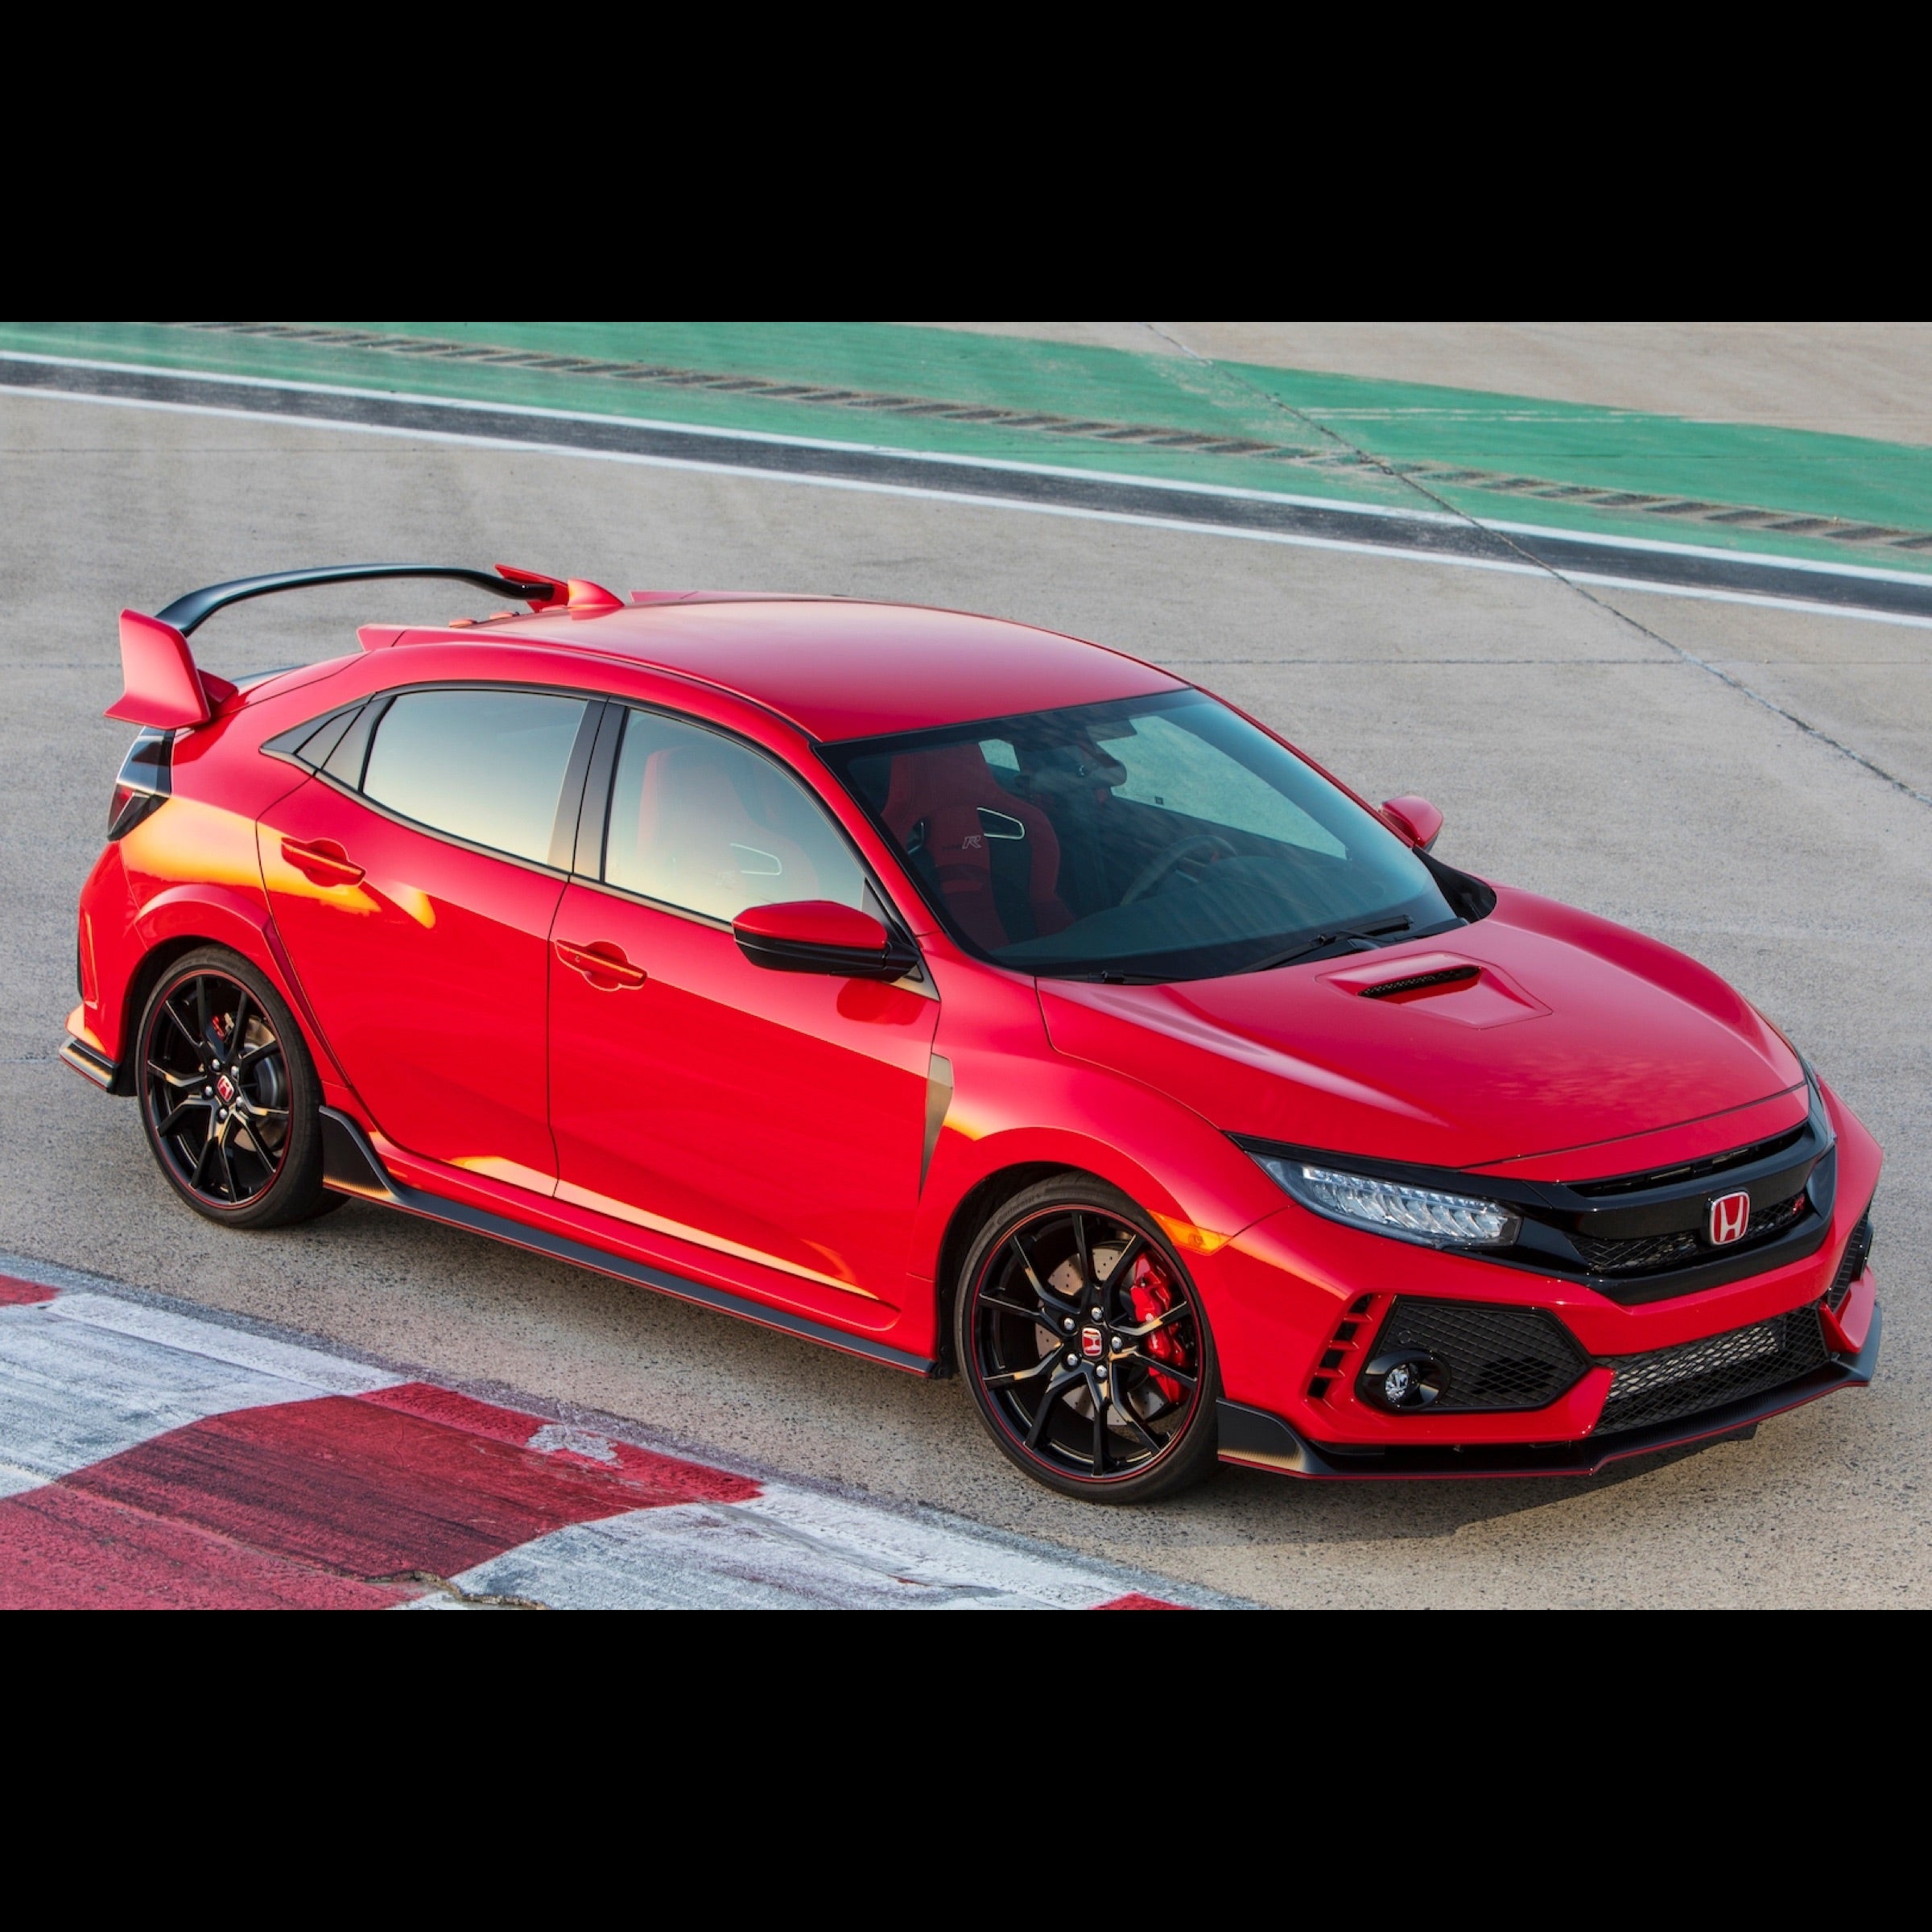 Honda Civic Type R in red on racetrack